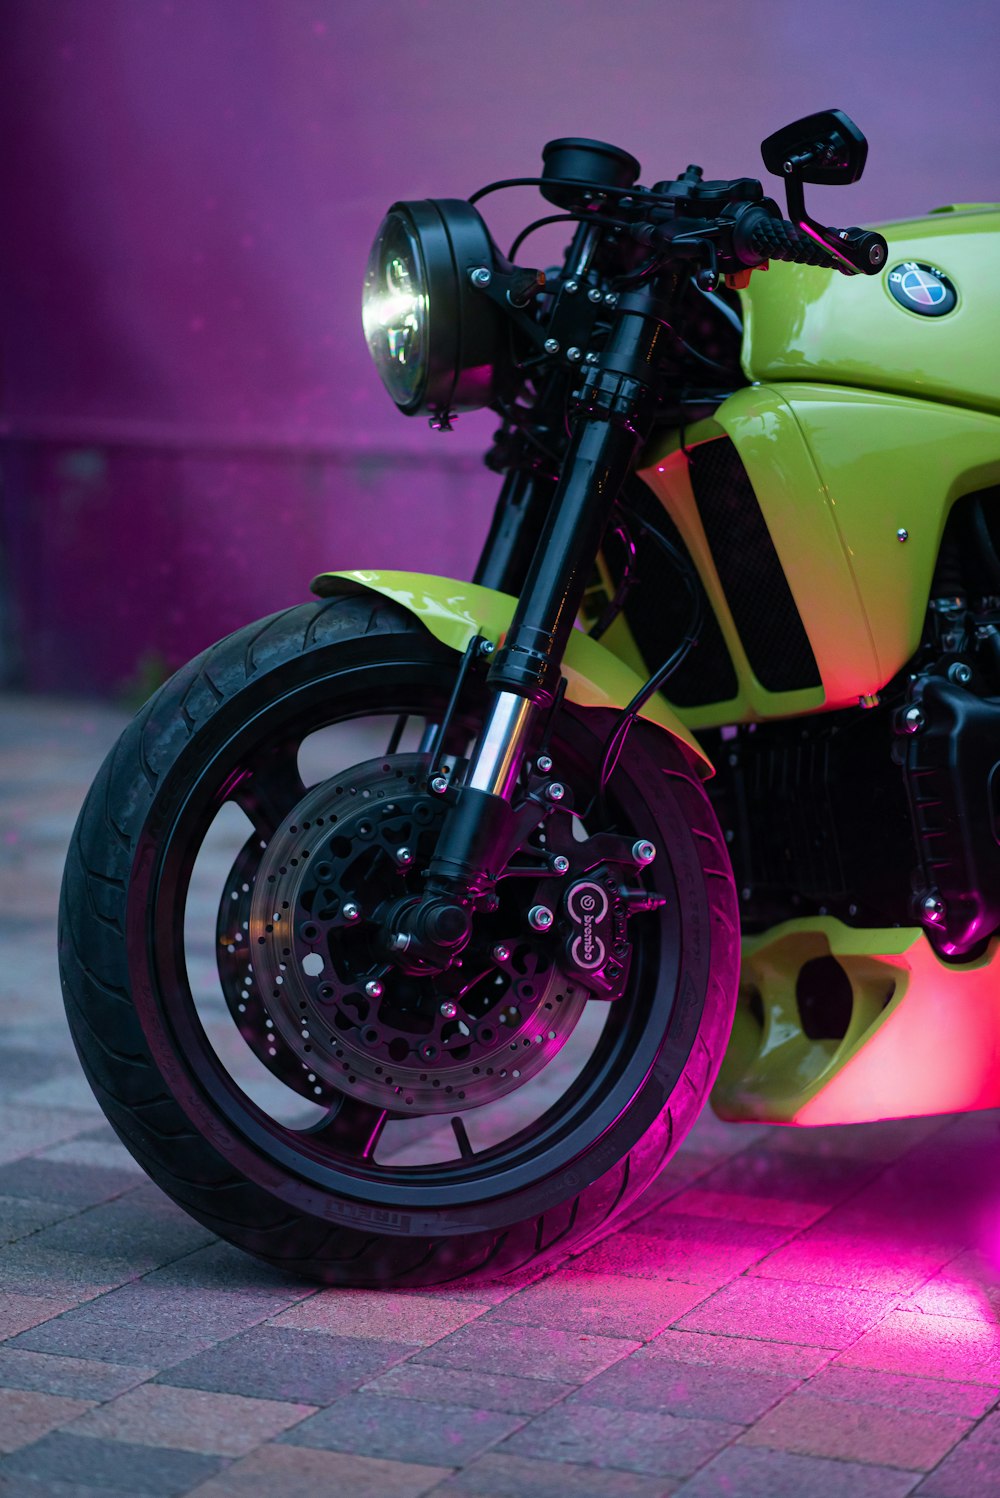 a green and yellow motorcycle